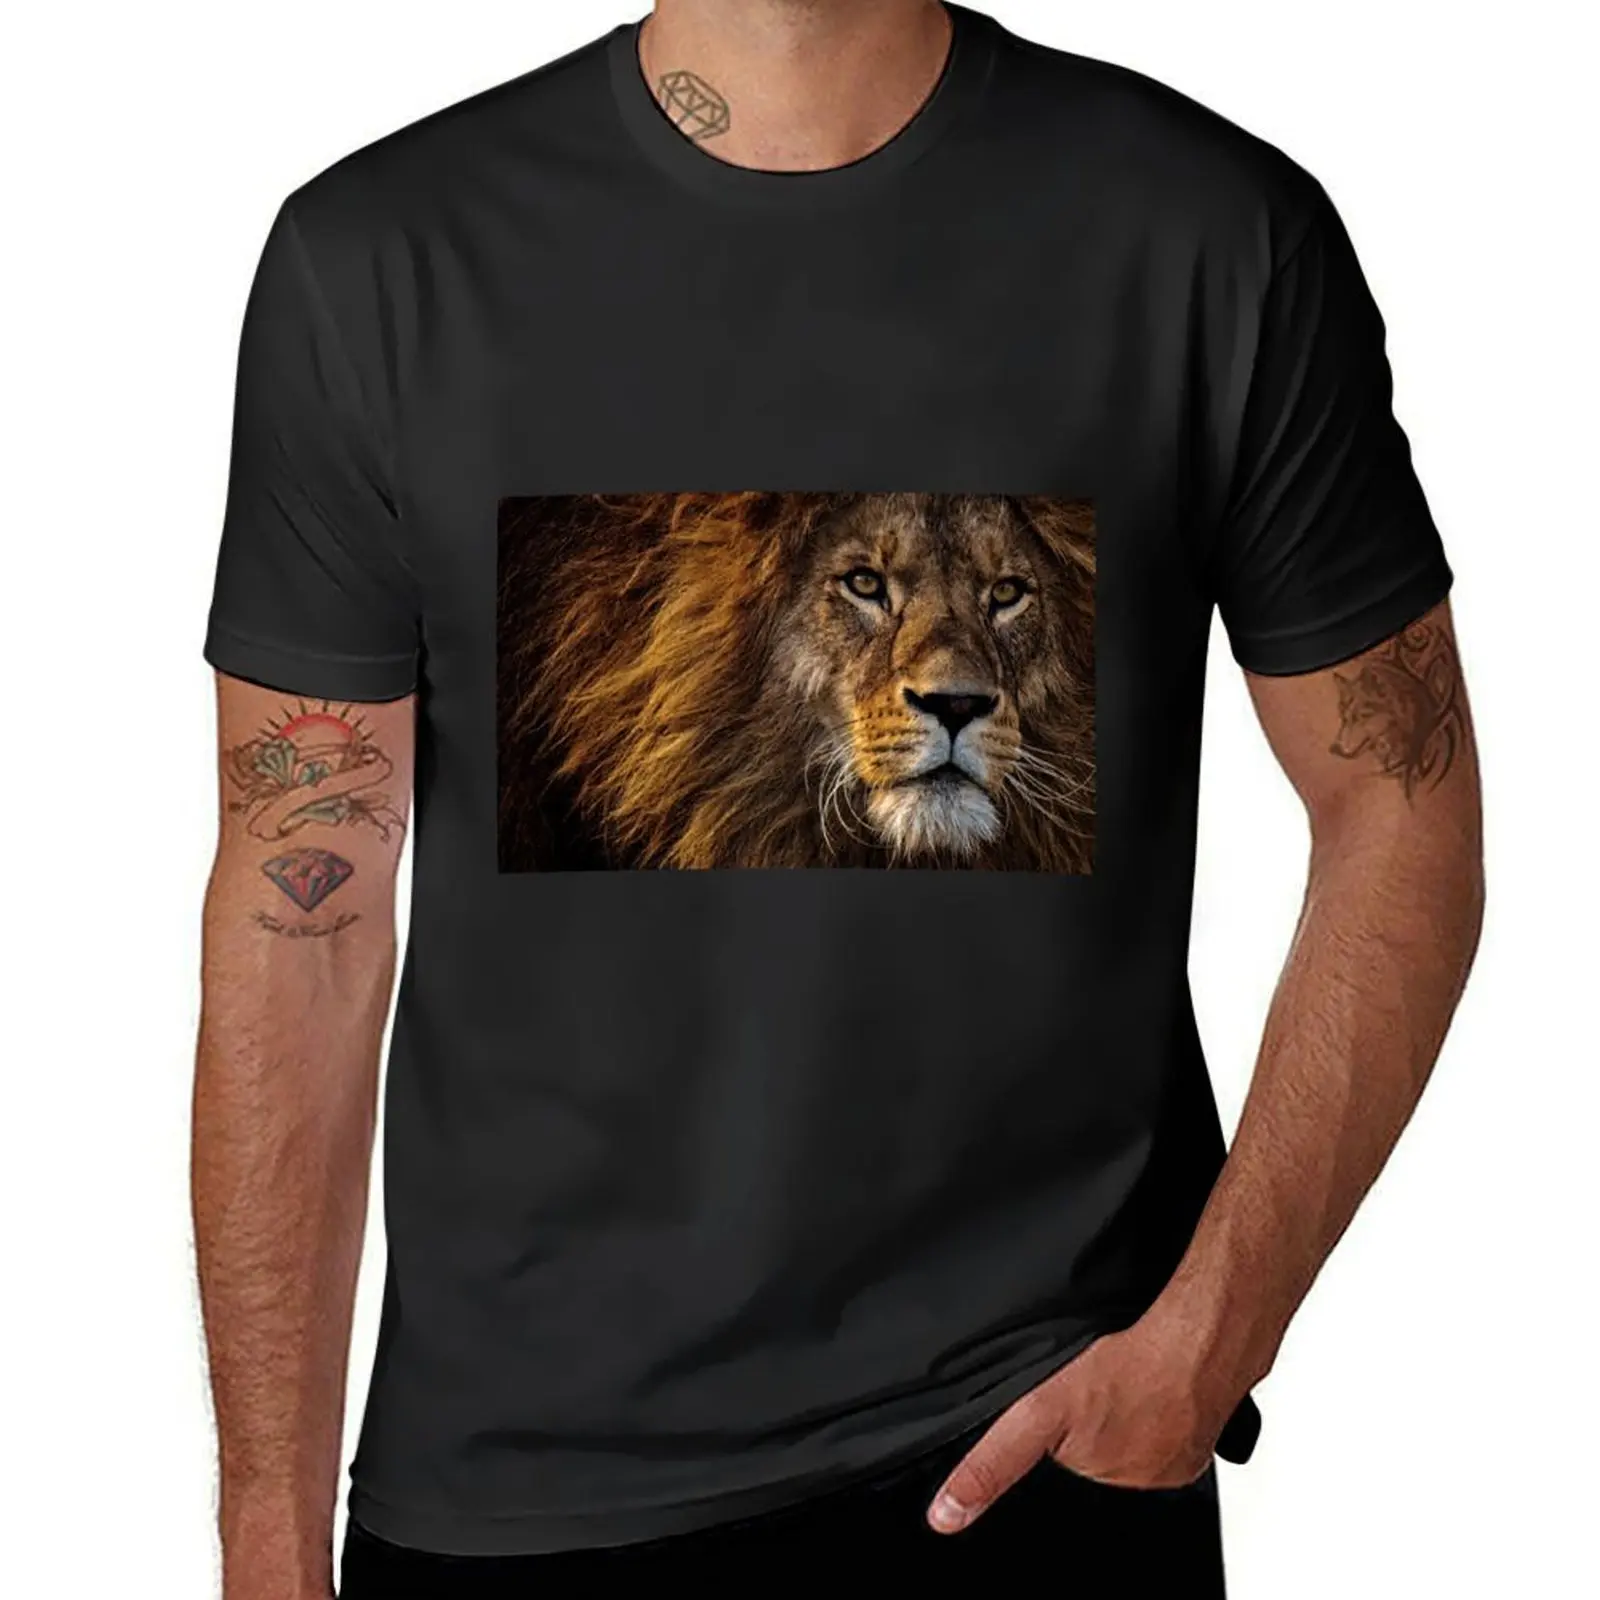 

Lion T-shirt shirts graphic tees heavyweights plus size tops mens clothing